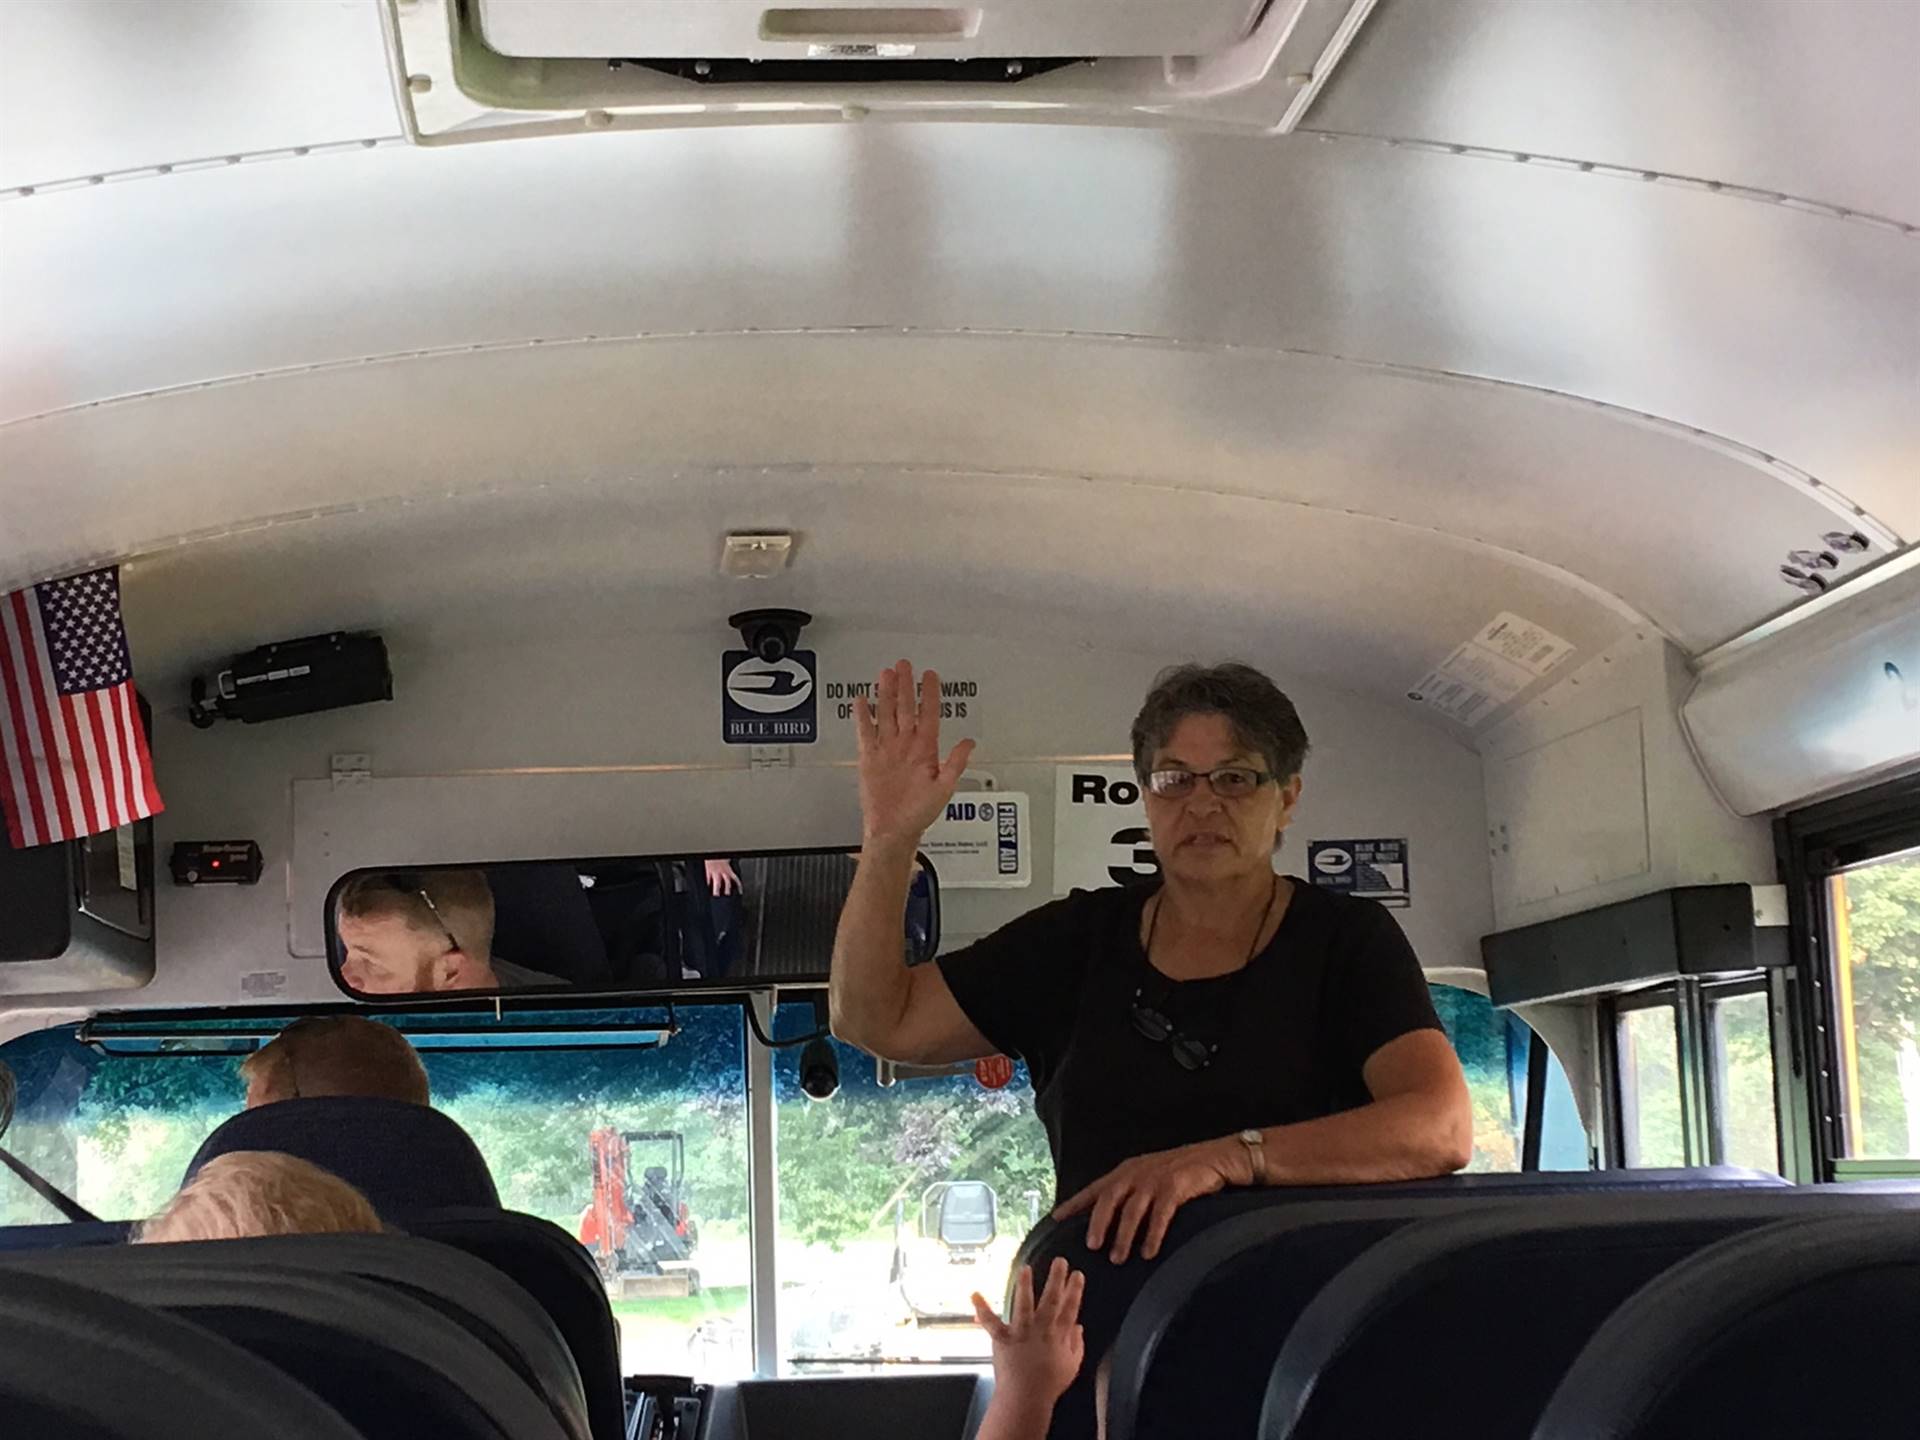 Bus driver shows how to quiet students on bus.